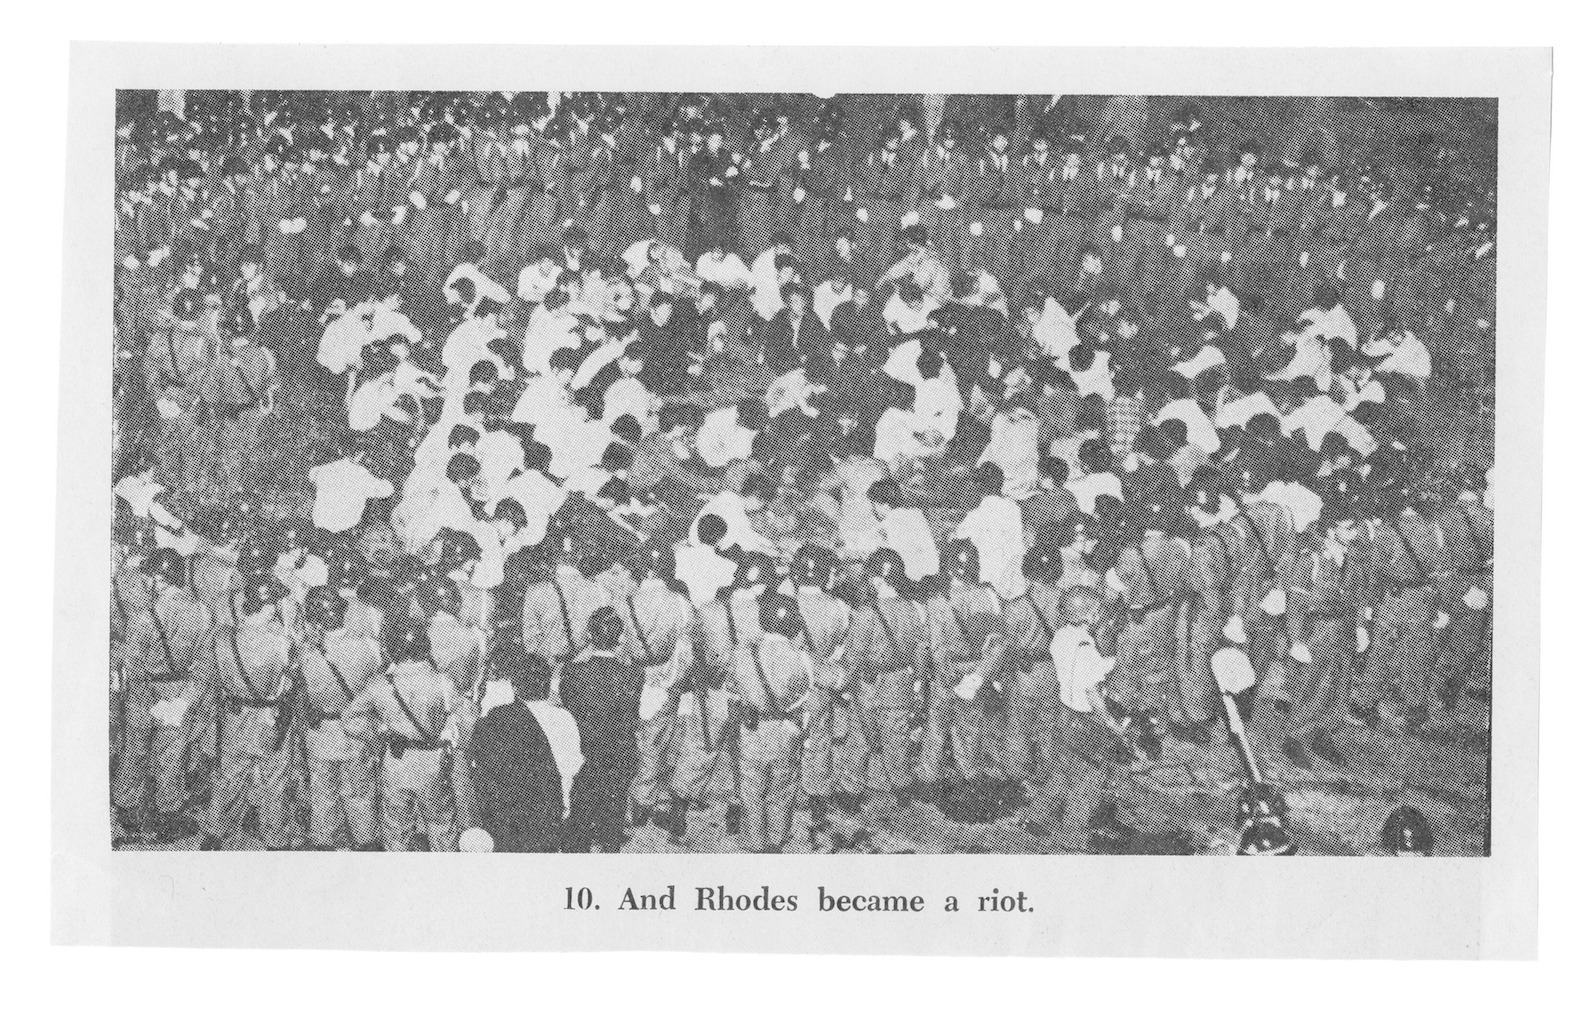 Black and white newspaper photo displaying a group of people with the subtitle '10. And Rhodes became a riot.'